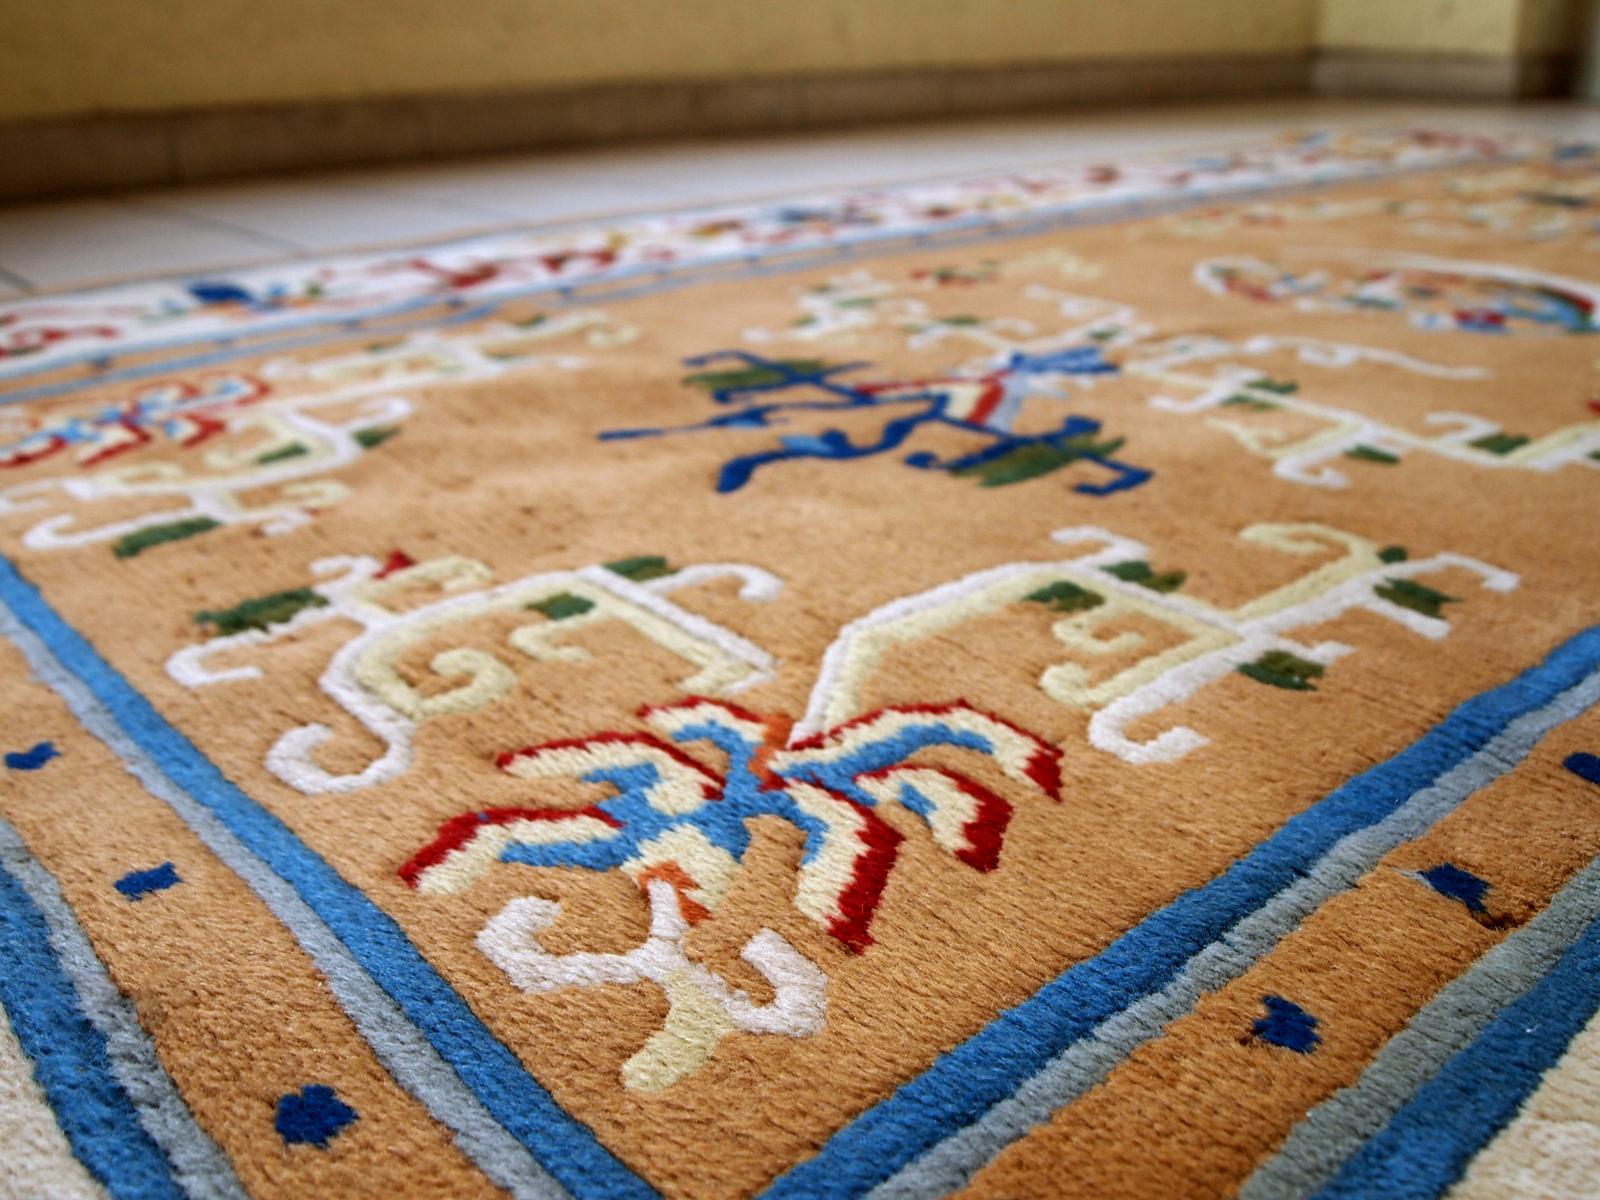 Vintage handmade Art Deco Chinese rug in good condition. Beautiful light brown background decorated with abstract design in burgundy and blue shades. 

-Condition: Good,

-circa 1960s,

-Size: 3.9' x 6.9' (120cm x 213cm),

-Material: